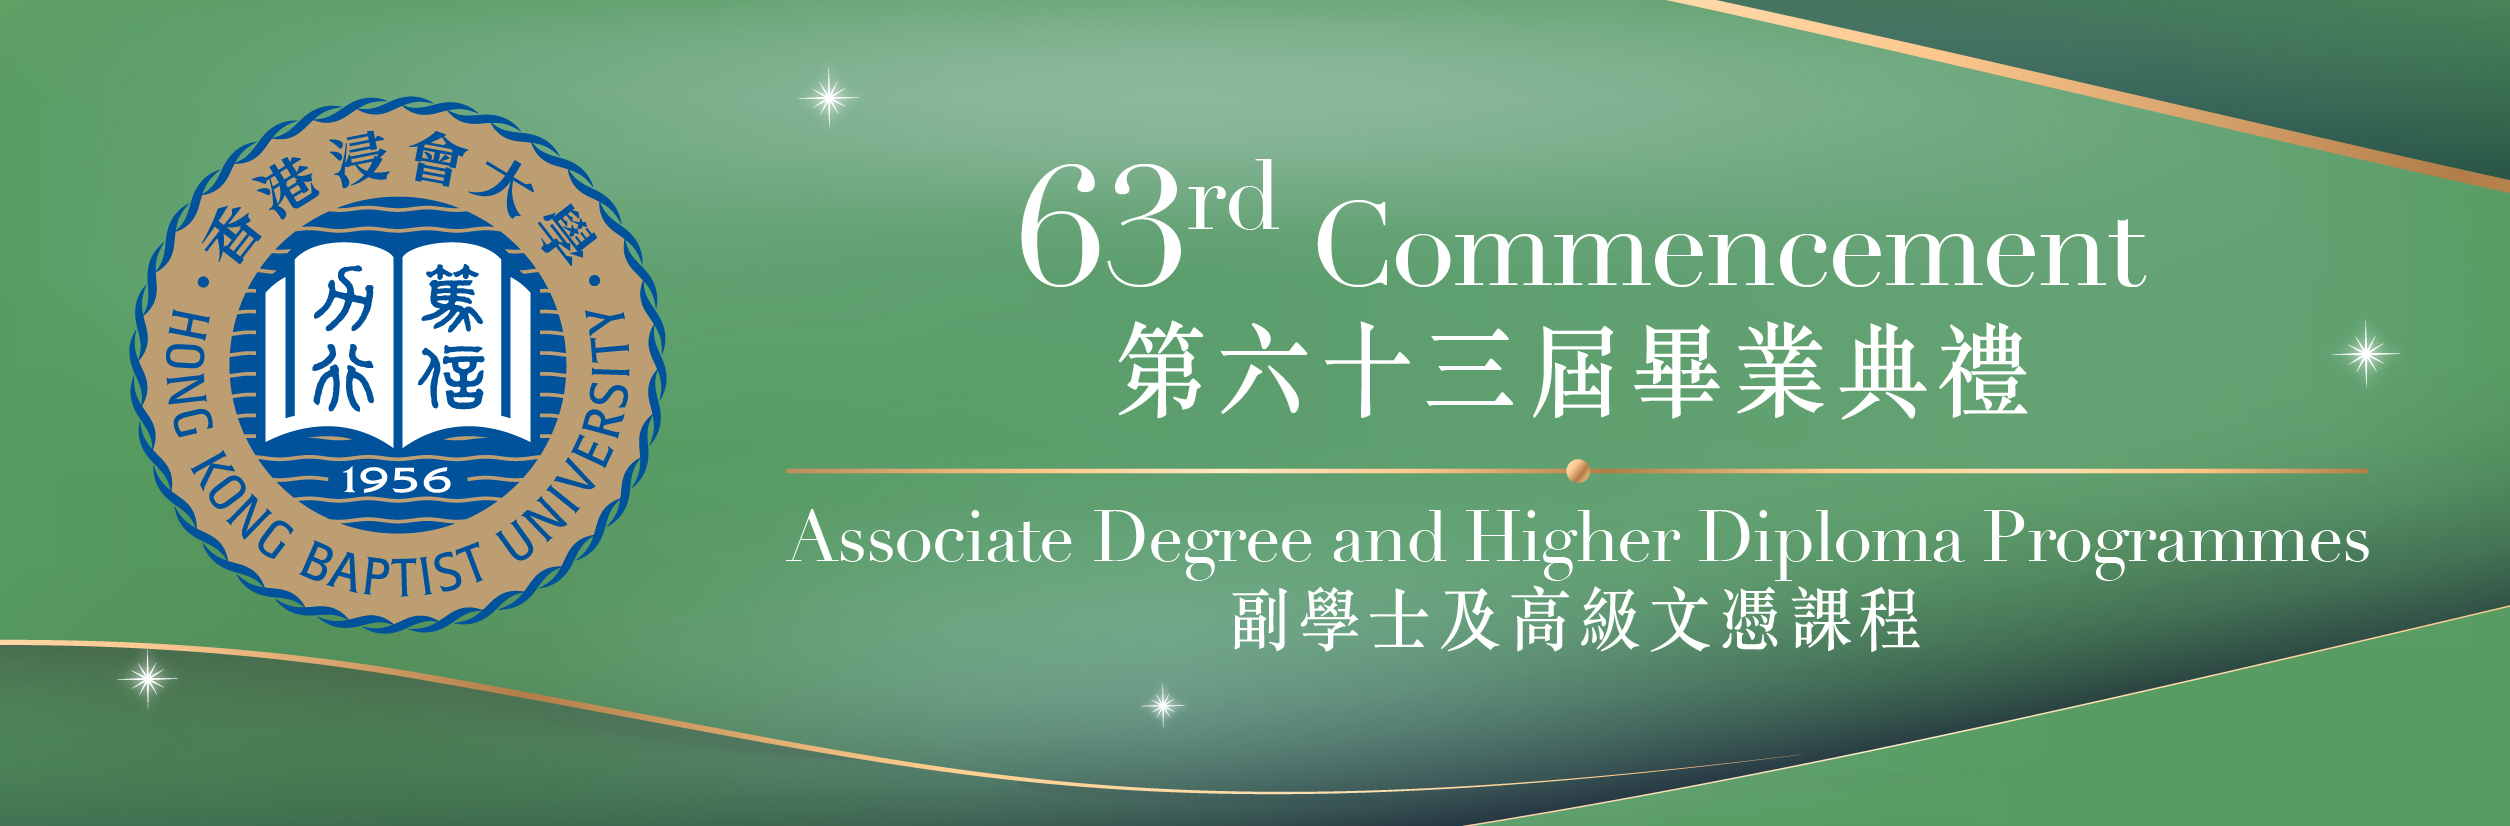 HKBU 63rd Commencement – Associate Degree and Higher Diploma Programmes